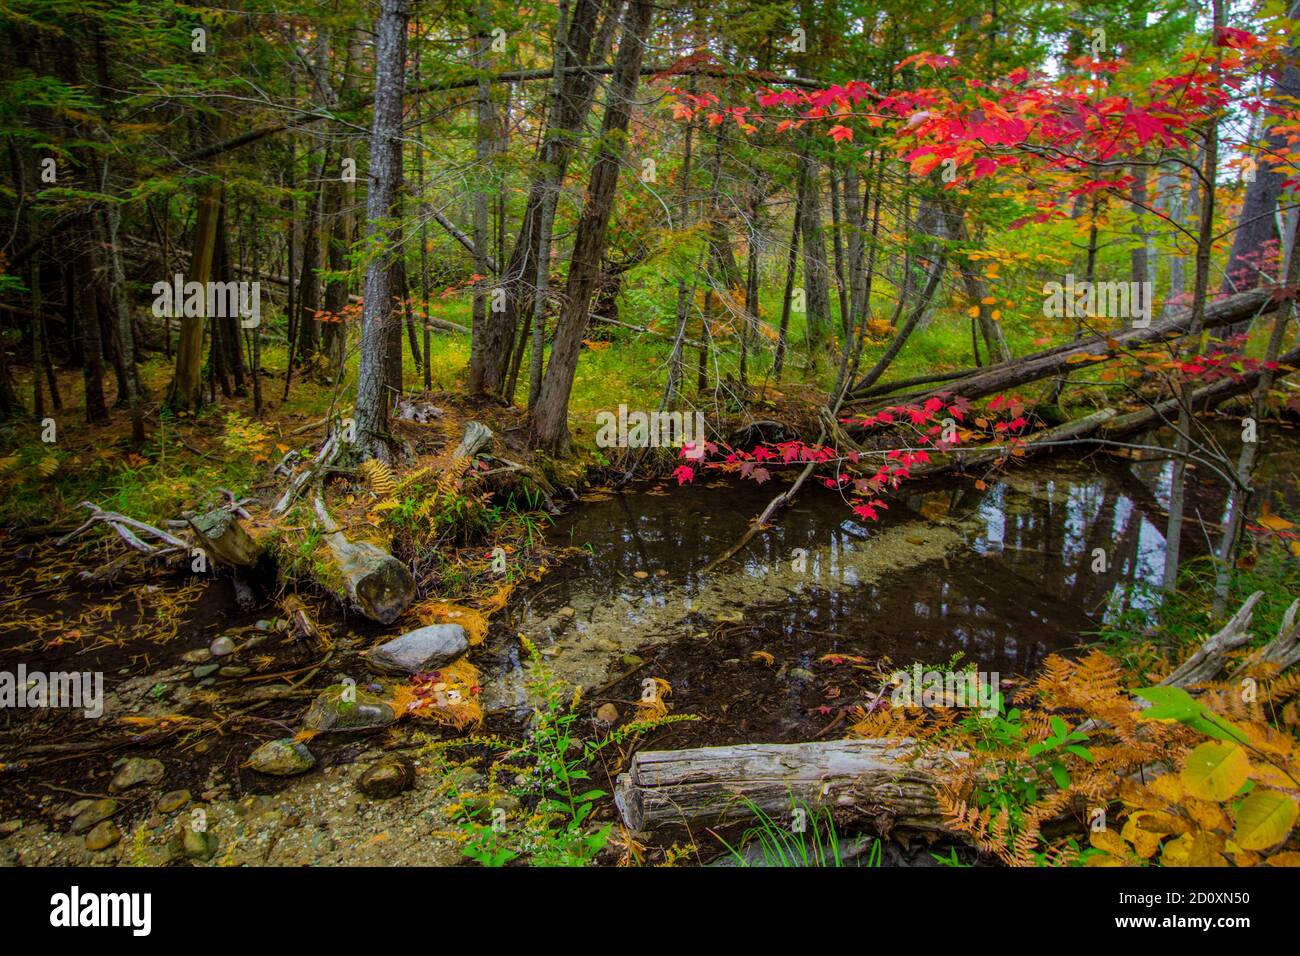 Autumn Forest Landscape. Stream through a forest with fall foliage in northern Michigan at Hartwick Pines State Park Stock Photo